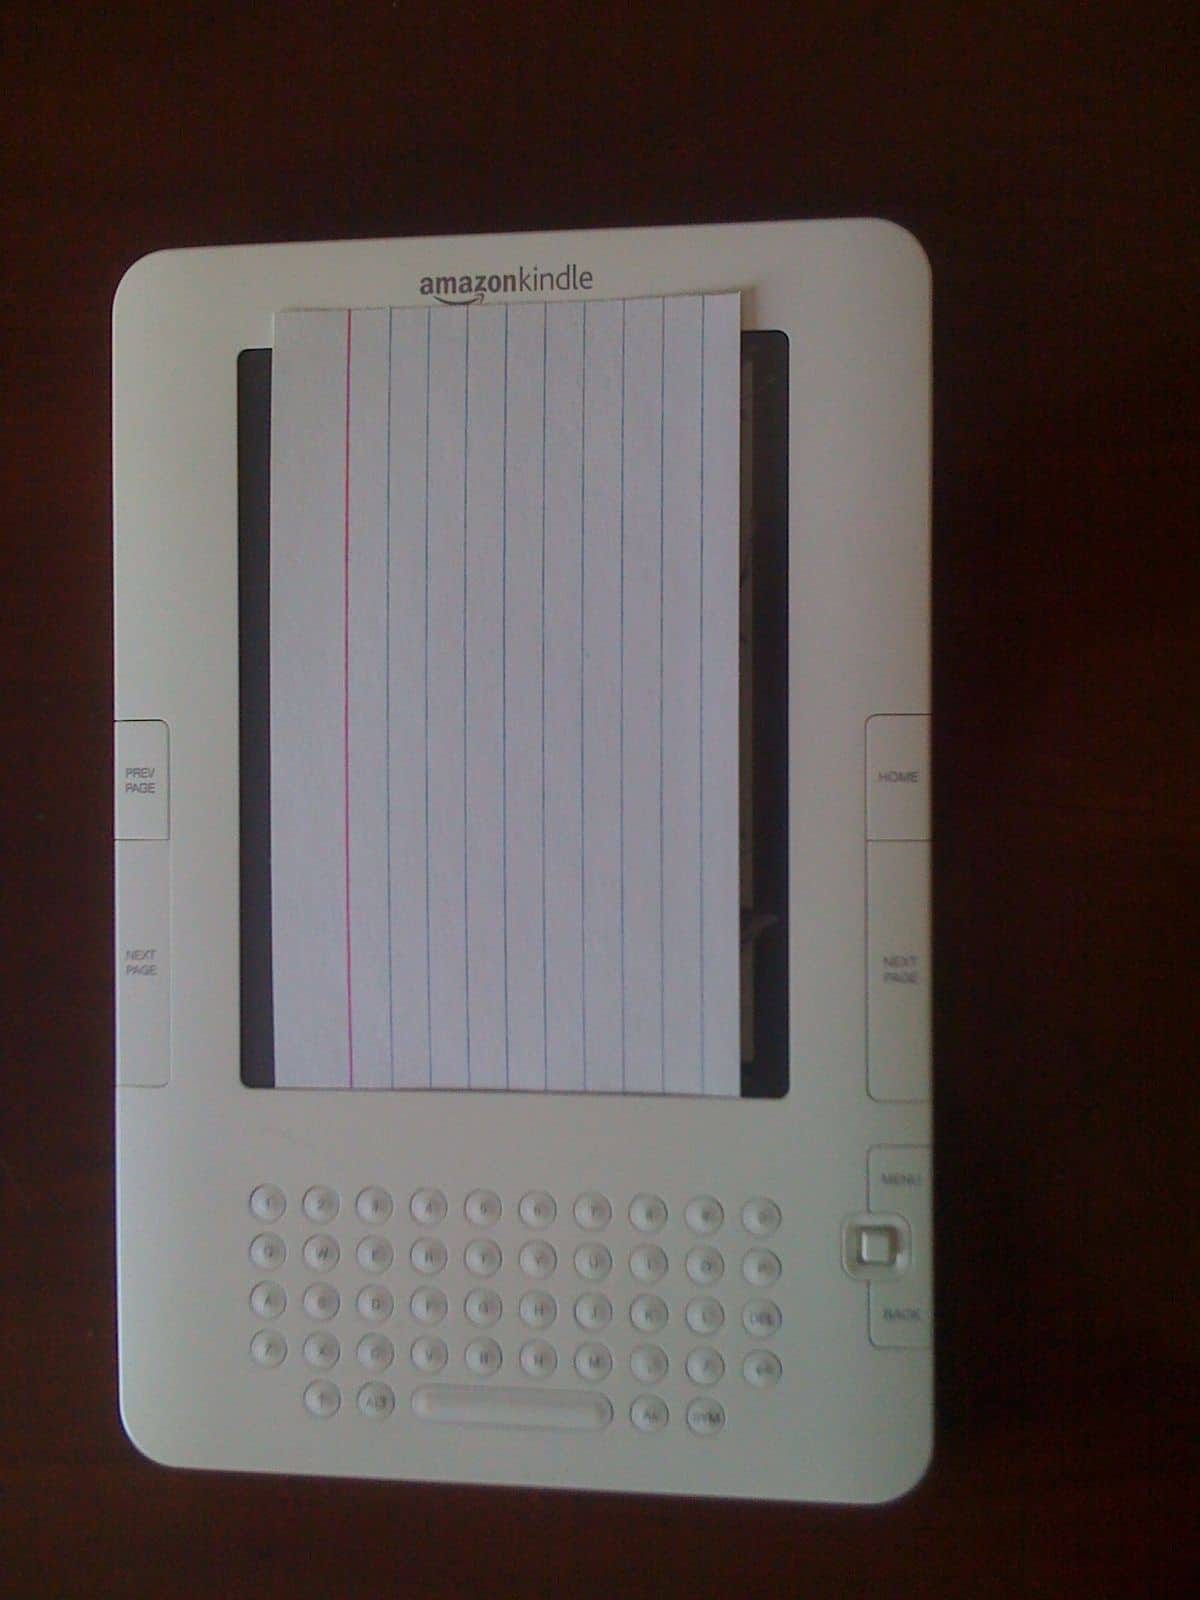 This shows the size of the Kindle 2's screen relative to a 2x5 notecard